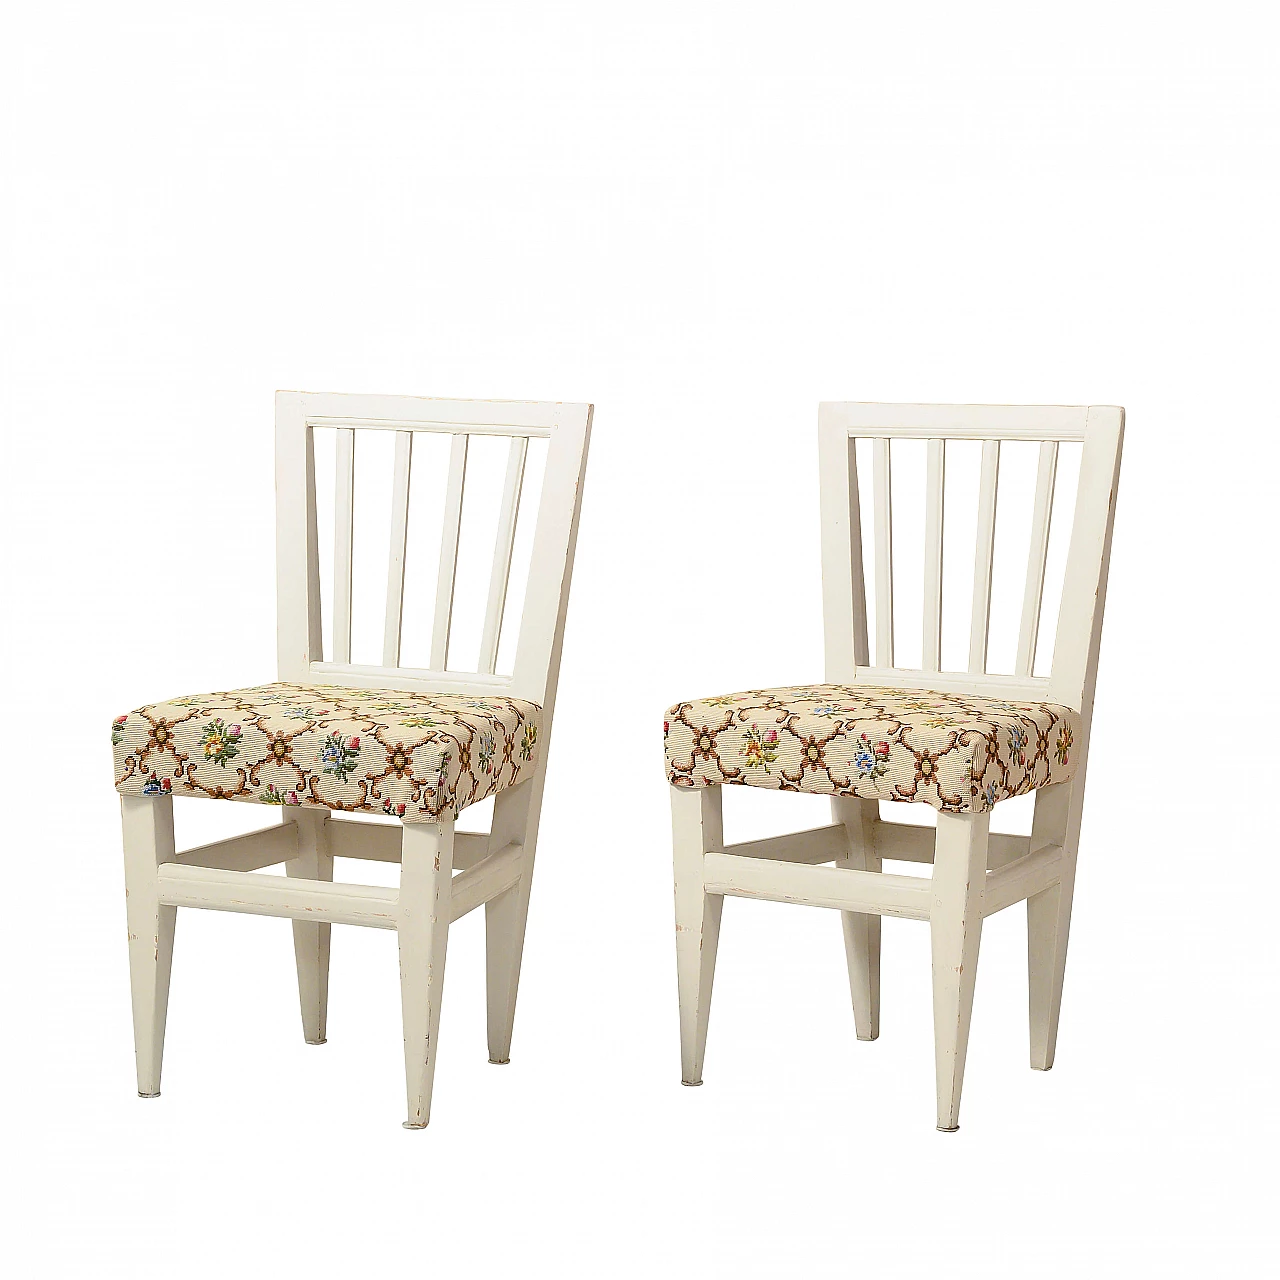 Pair of antique white chairs with hand embroidery, beginning of the 20th century 1144086